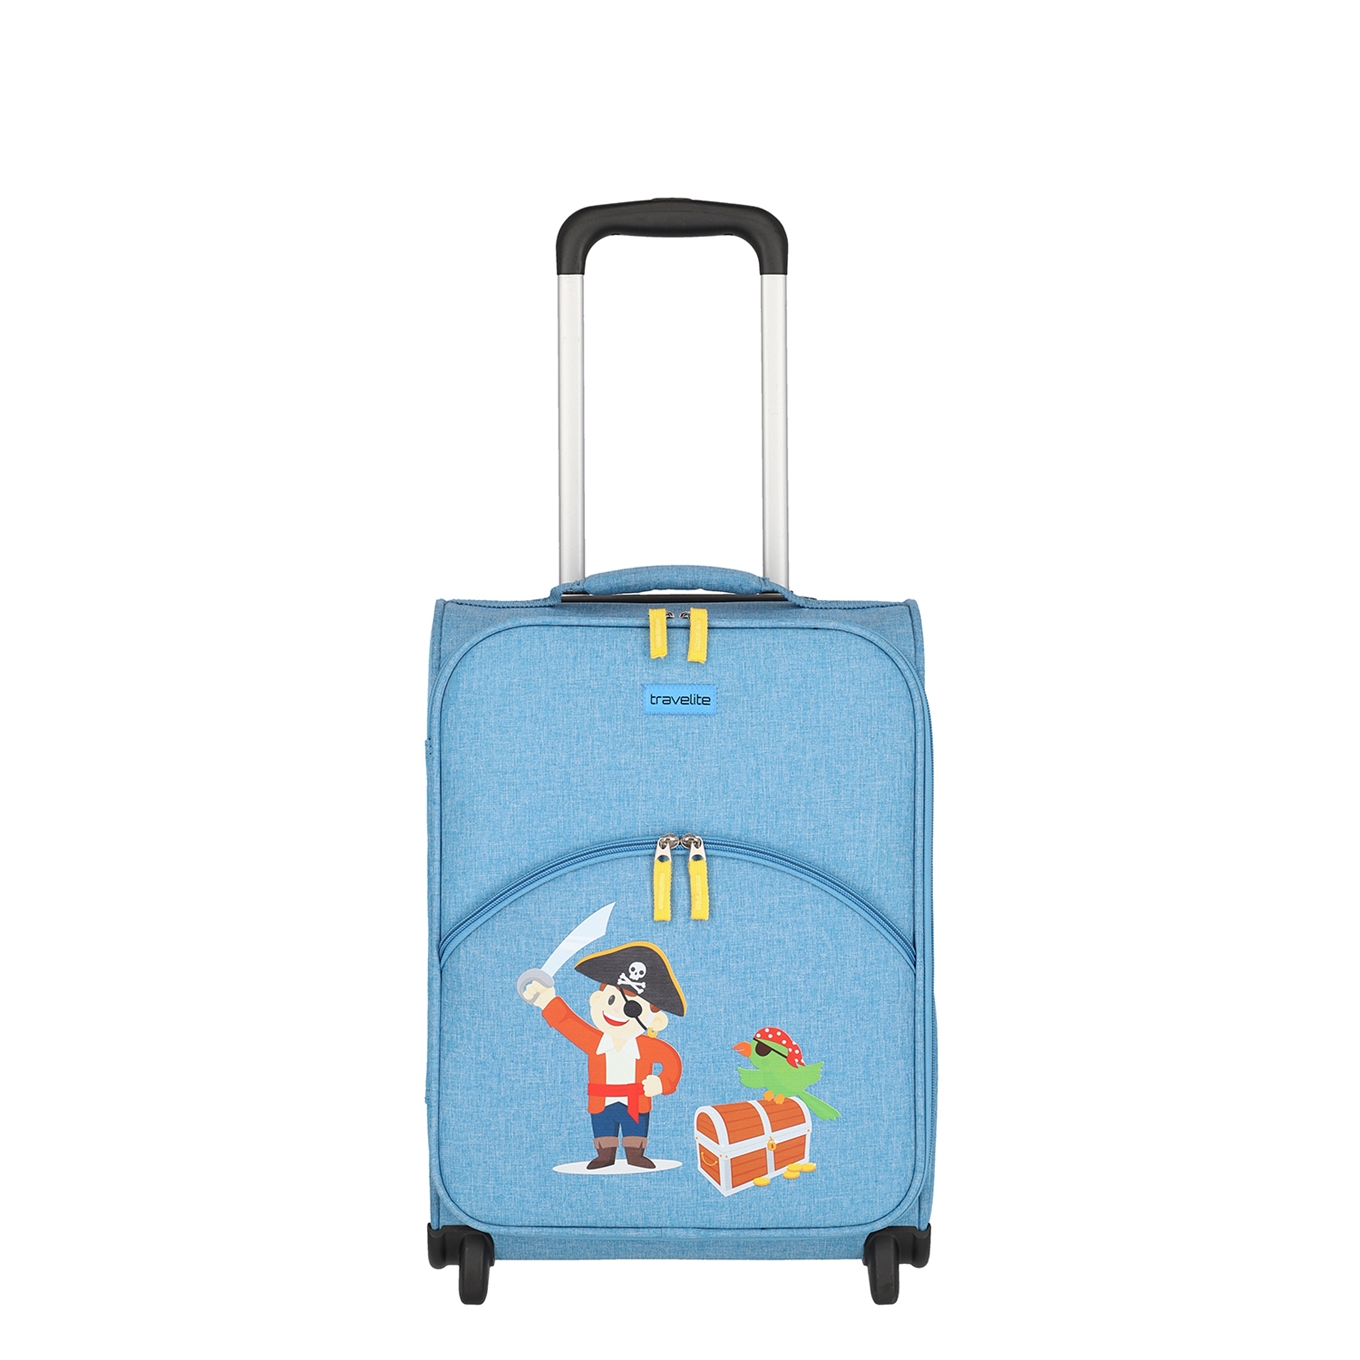 Travelite Youngster 2 Wheel Kids Trolley pirate/blue Zachte koffer